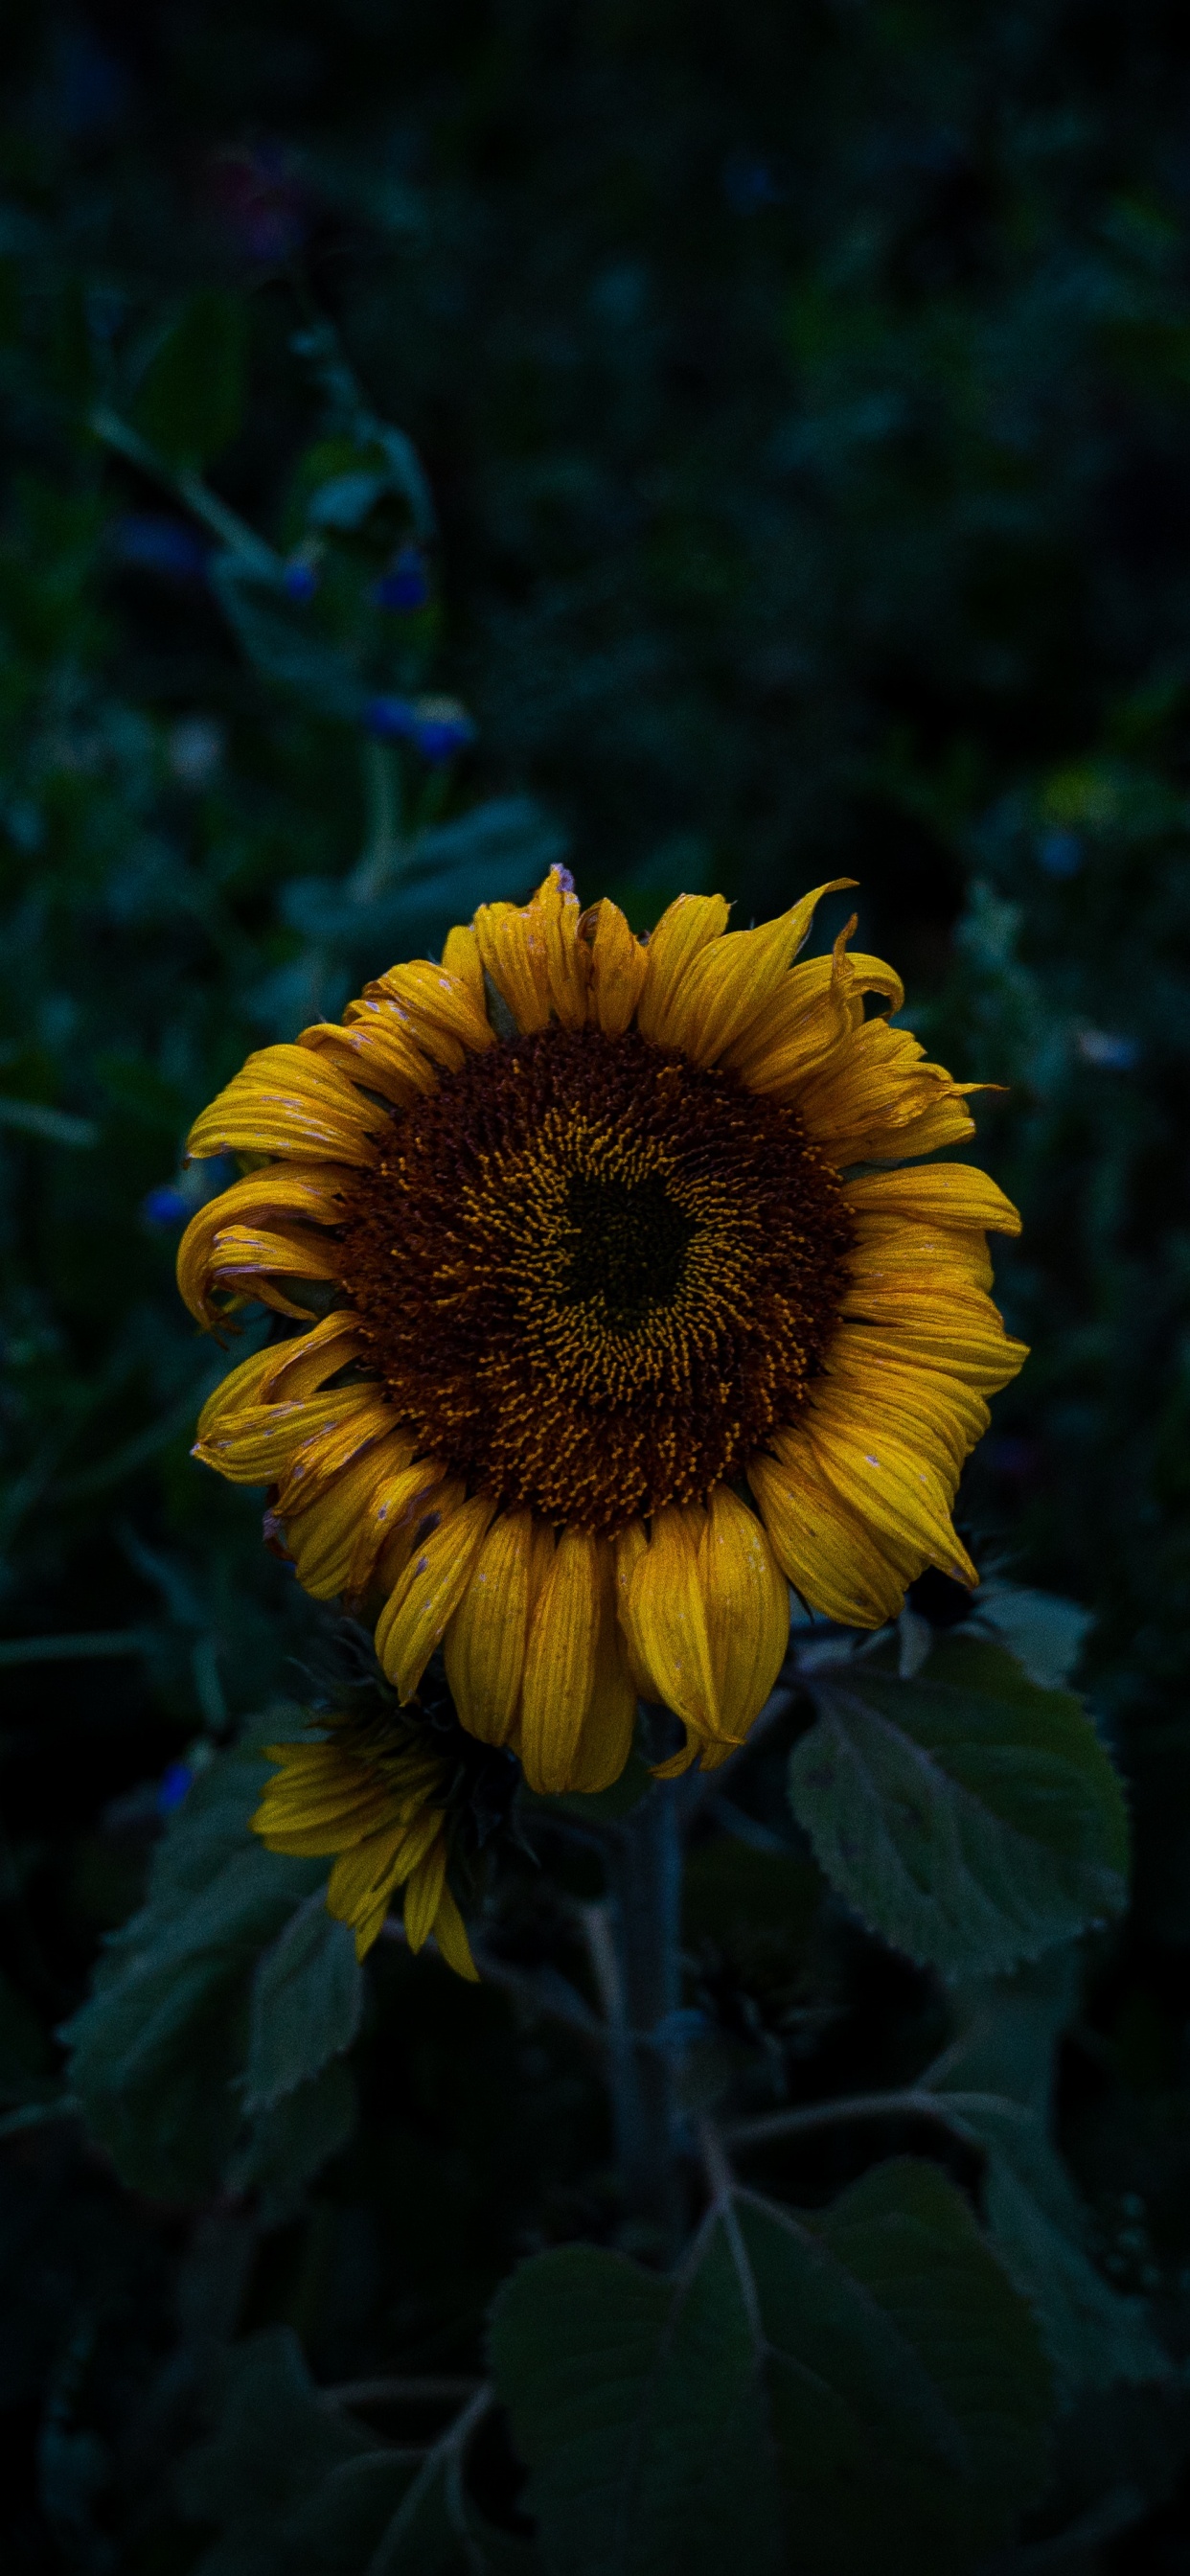 Yellow Sunflower in Bloom During Daytime. Wallpaper in 1242x2688 Resolution